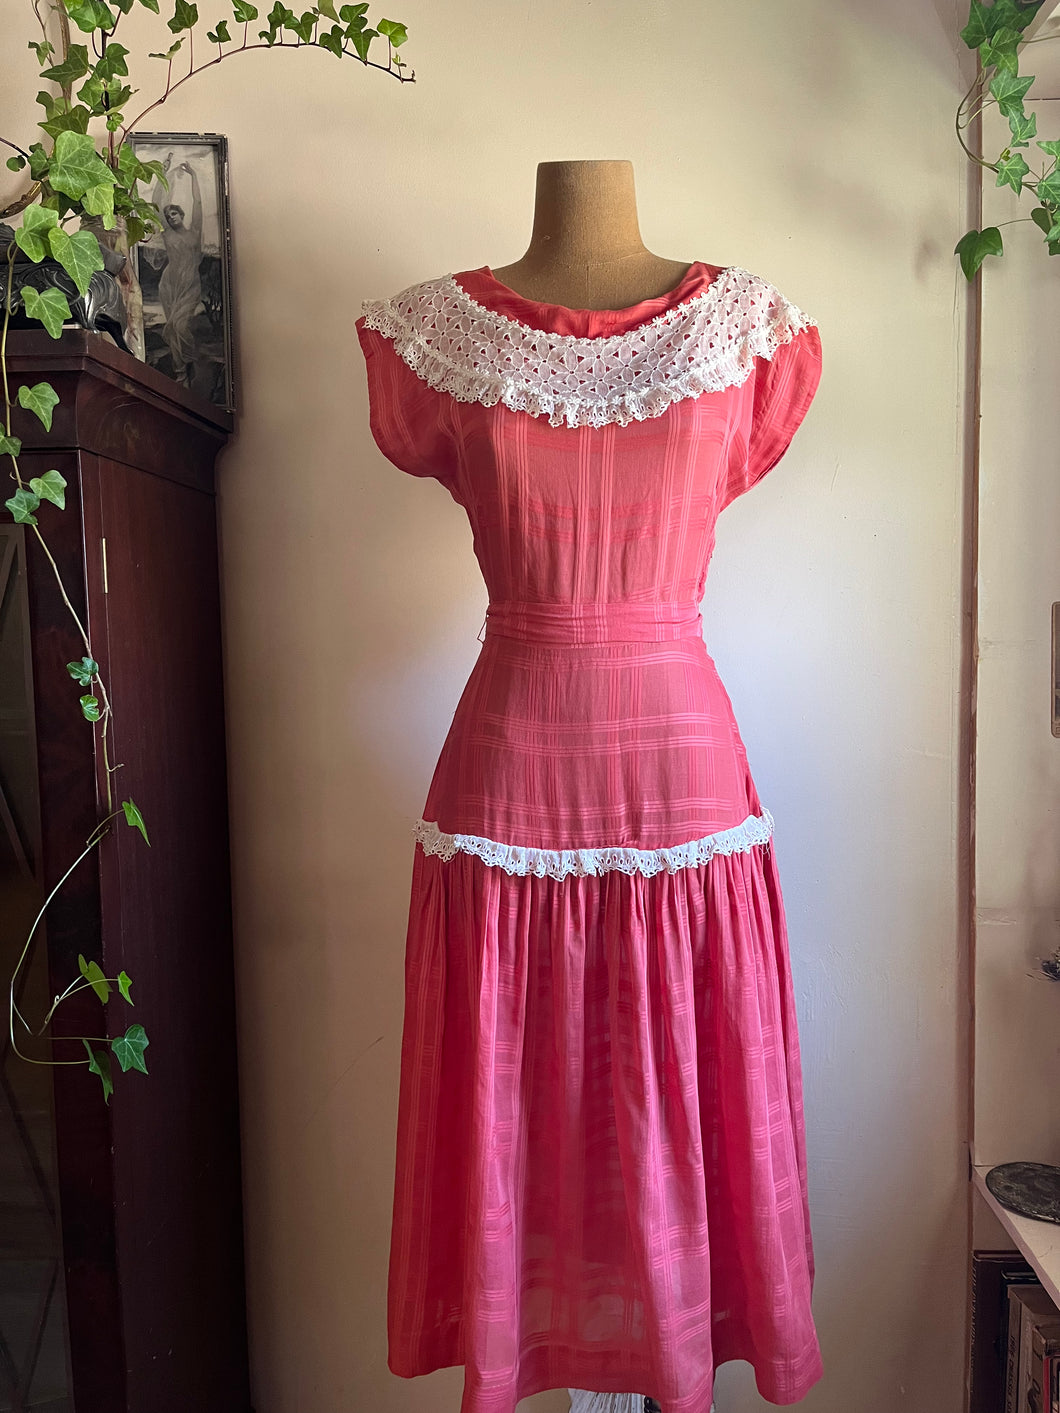 1950’s Vintage Sheer Cotton and Lace dress by Vicky Vaughn Juniors